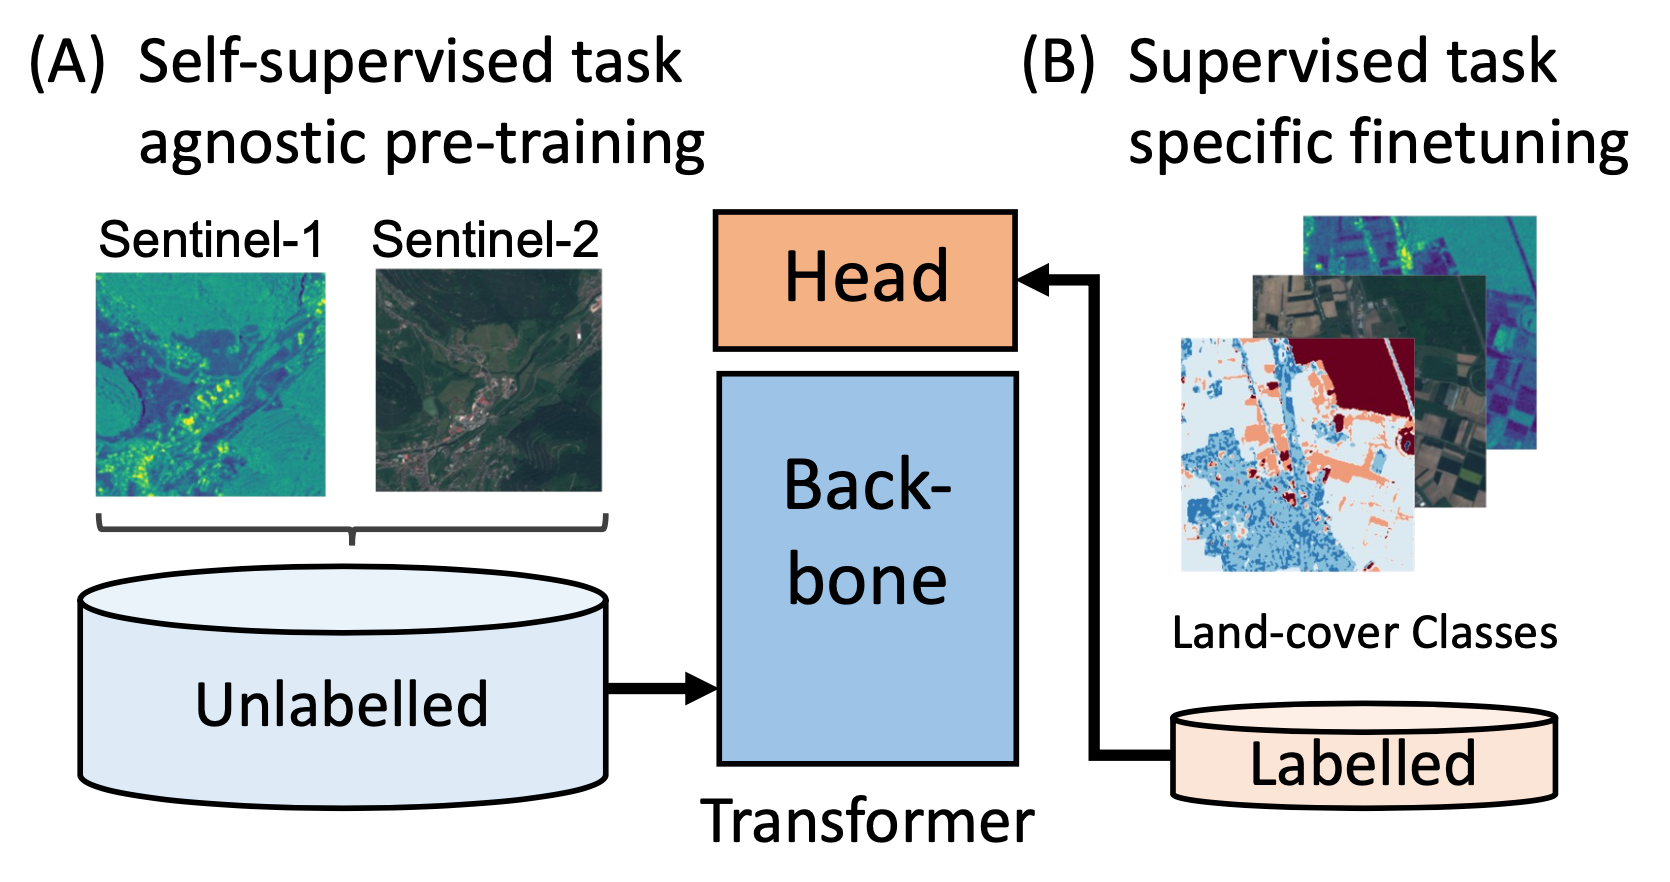 An overview of our self-supervised multi-modal contrastive learning approach for Vision Transformers. We propose to use large datasets of unlabelled multi-modal remote sensing data (Sentinel-1 and Sentinel-2) for self-supervised pre-training of vision Transformers using a contrastive loss. After self-supervised training of the backbone (A), the model and task-specific head can be fine-tuned on much smaller labelled datasets for different downstream tasks (B), such as land-cover segmentation and classification.